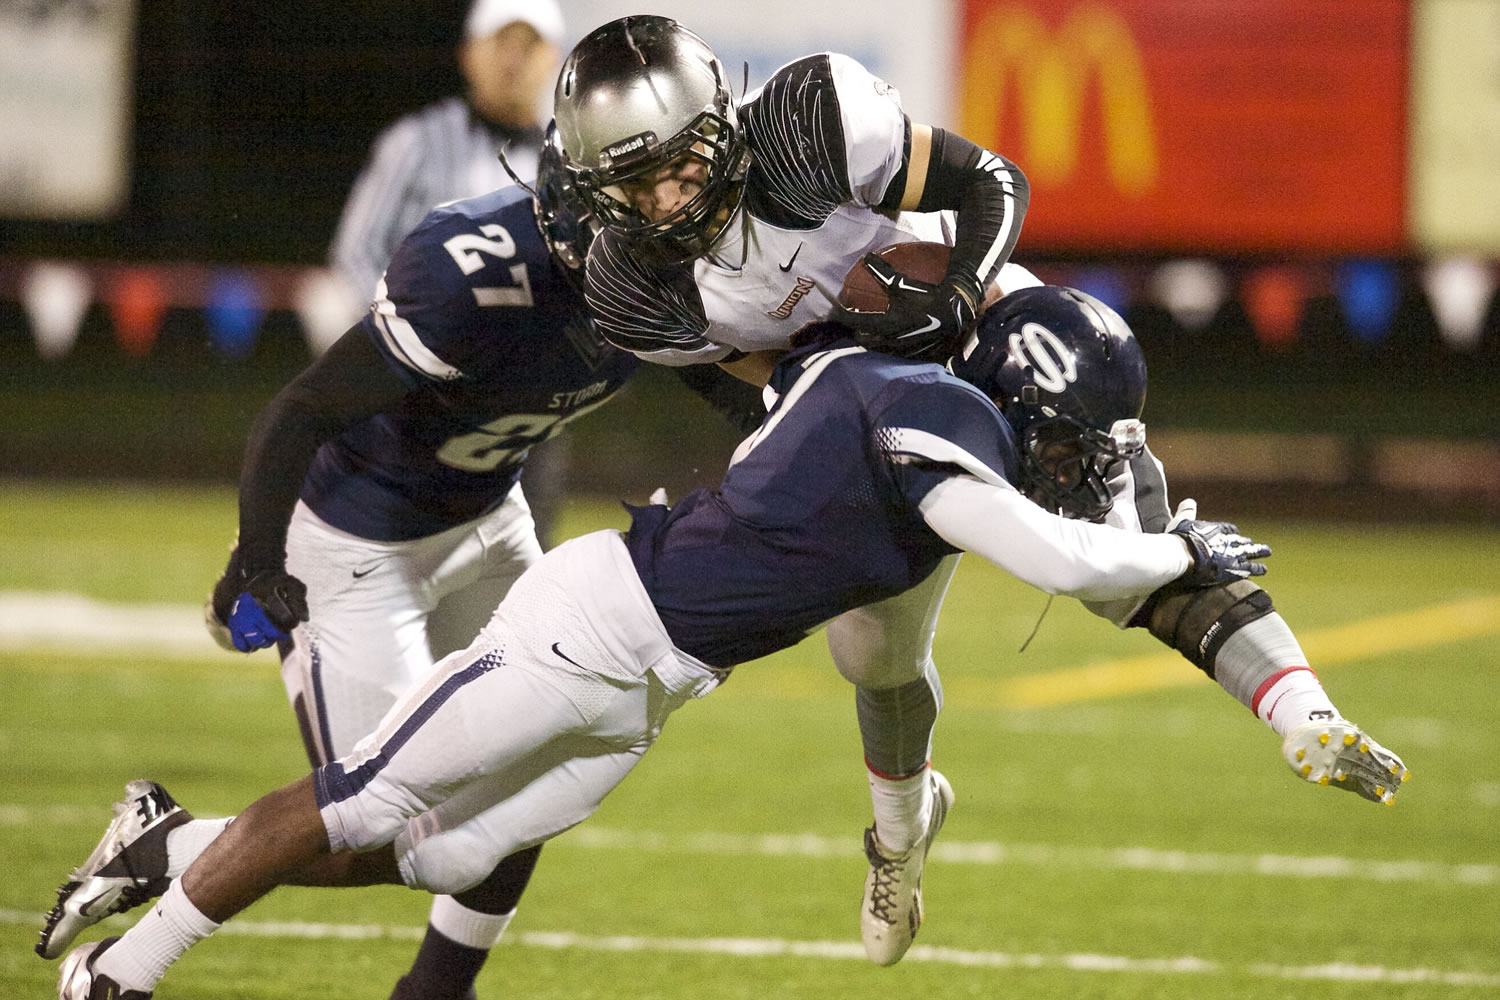 Union's Jack Bauer gained 123 of his 137 rushing yards and both of his touchdowns in the second half against Skyview.